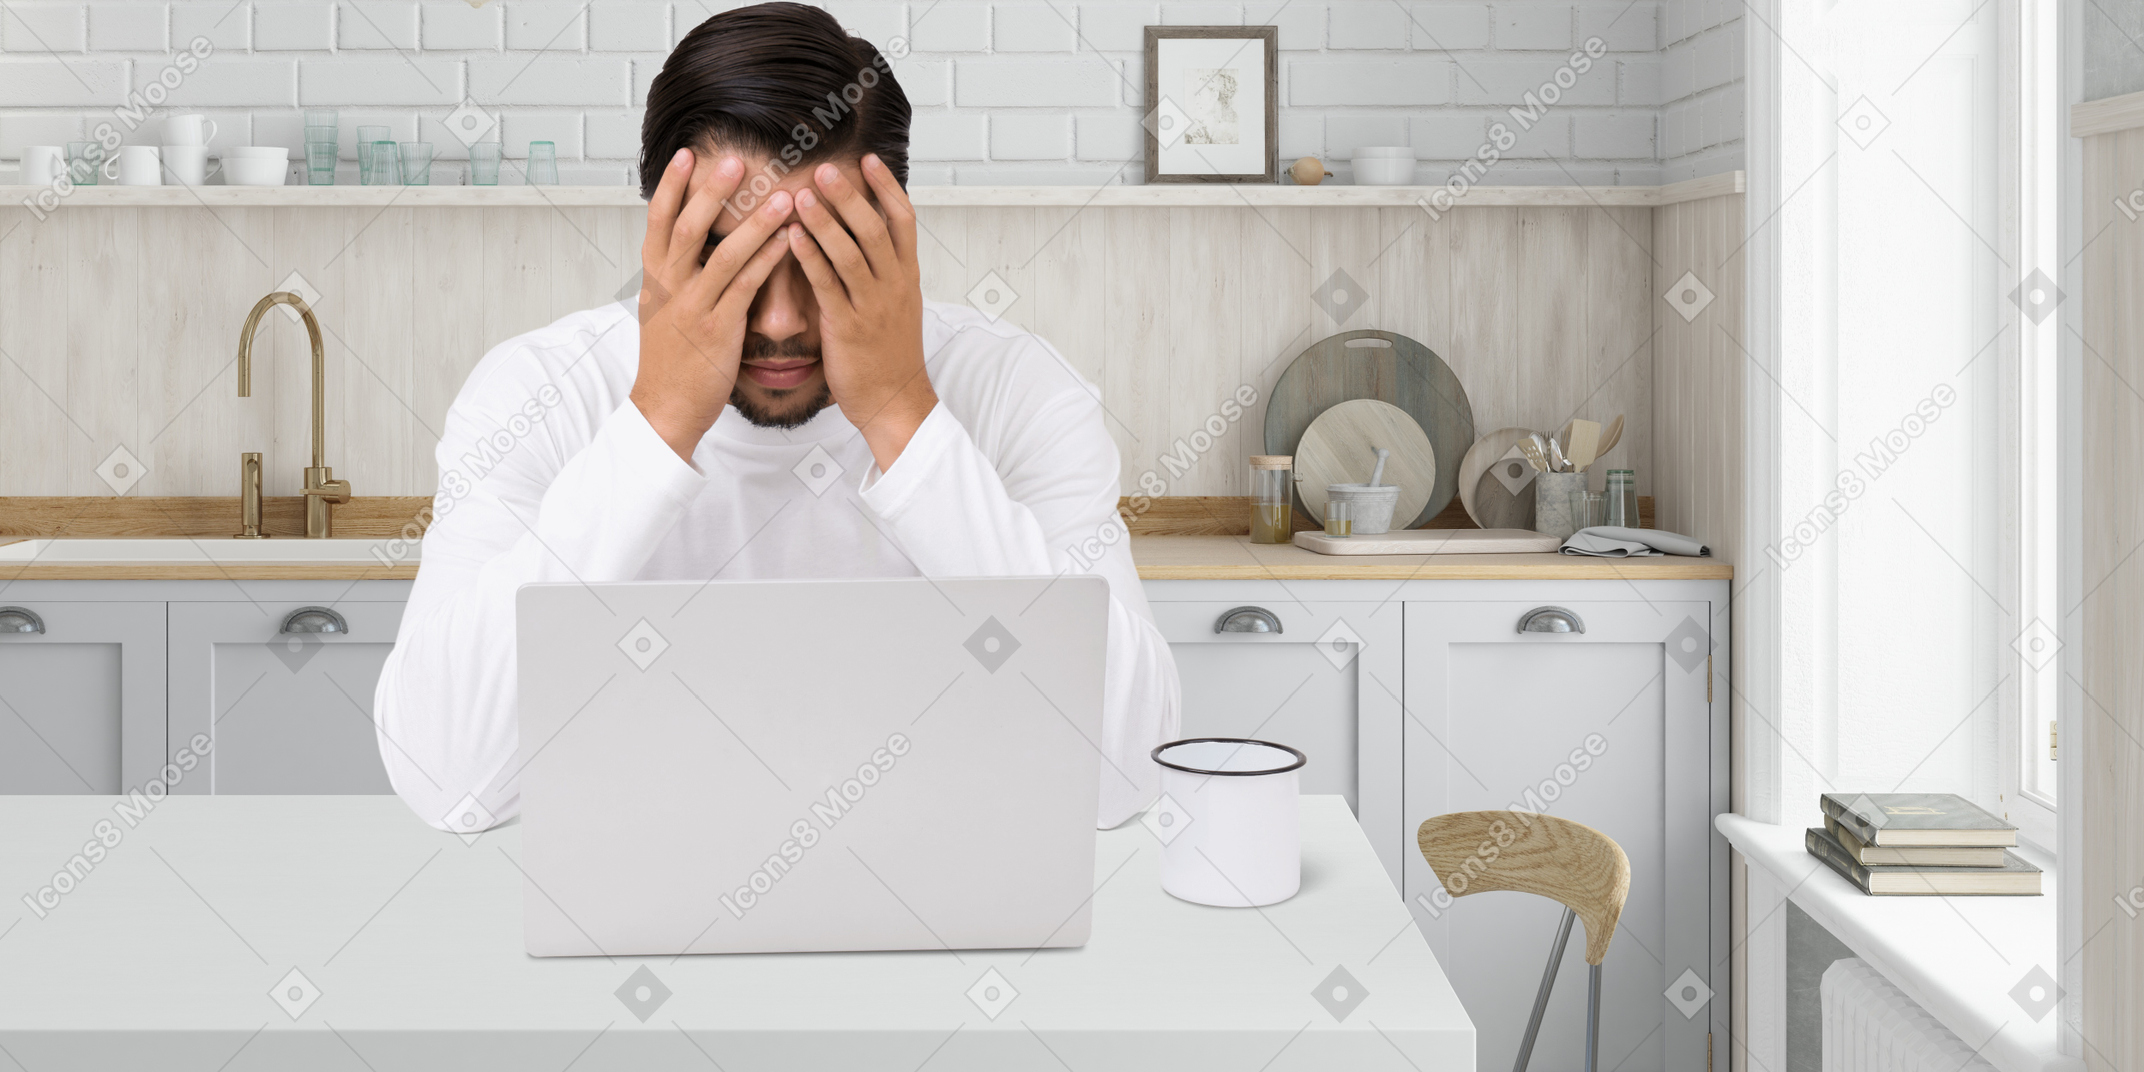 A man sitting in front of a laptop computer